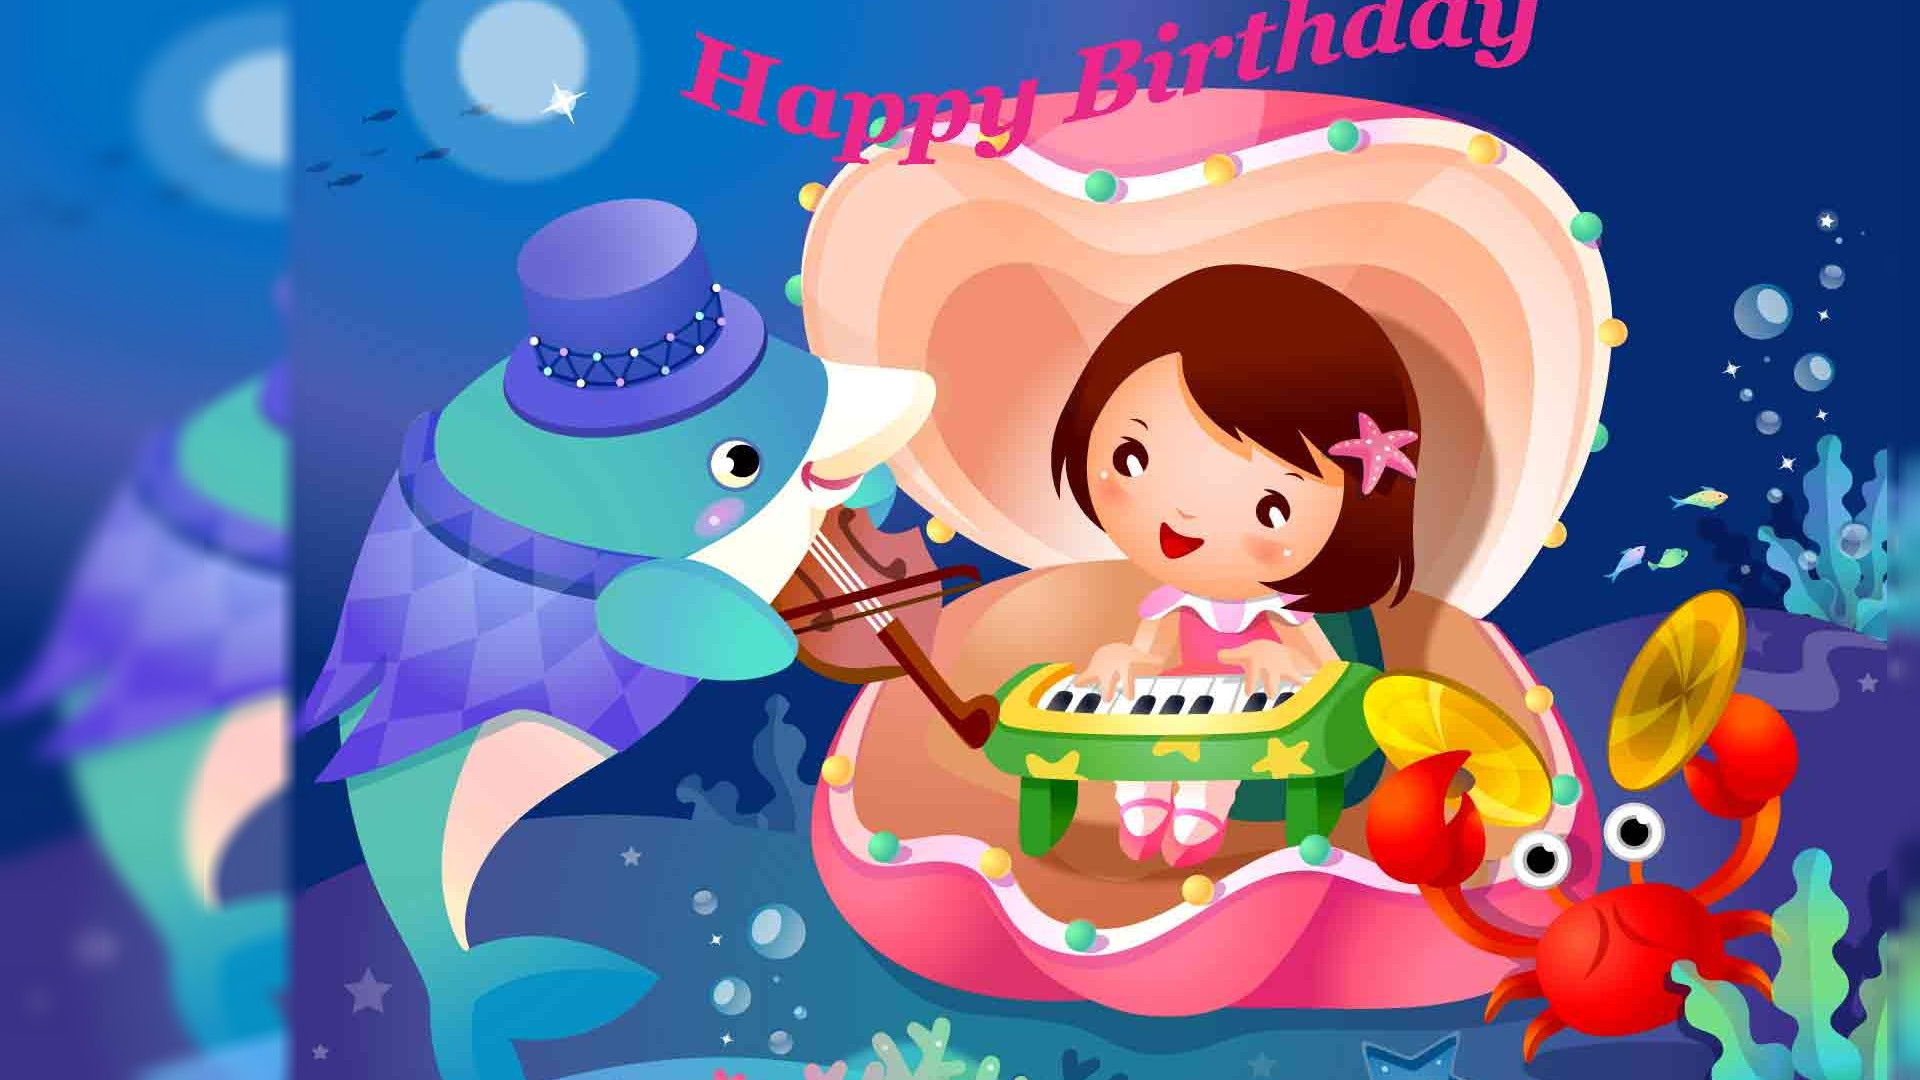 Download Funny Happy Birthday Images Free 
 Data Src - Happy Birthday Animation Photo Download - HD Wallpaper 